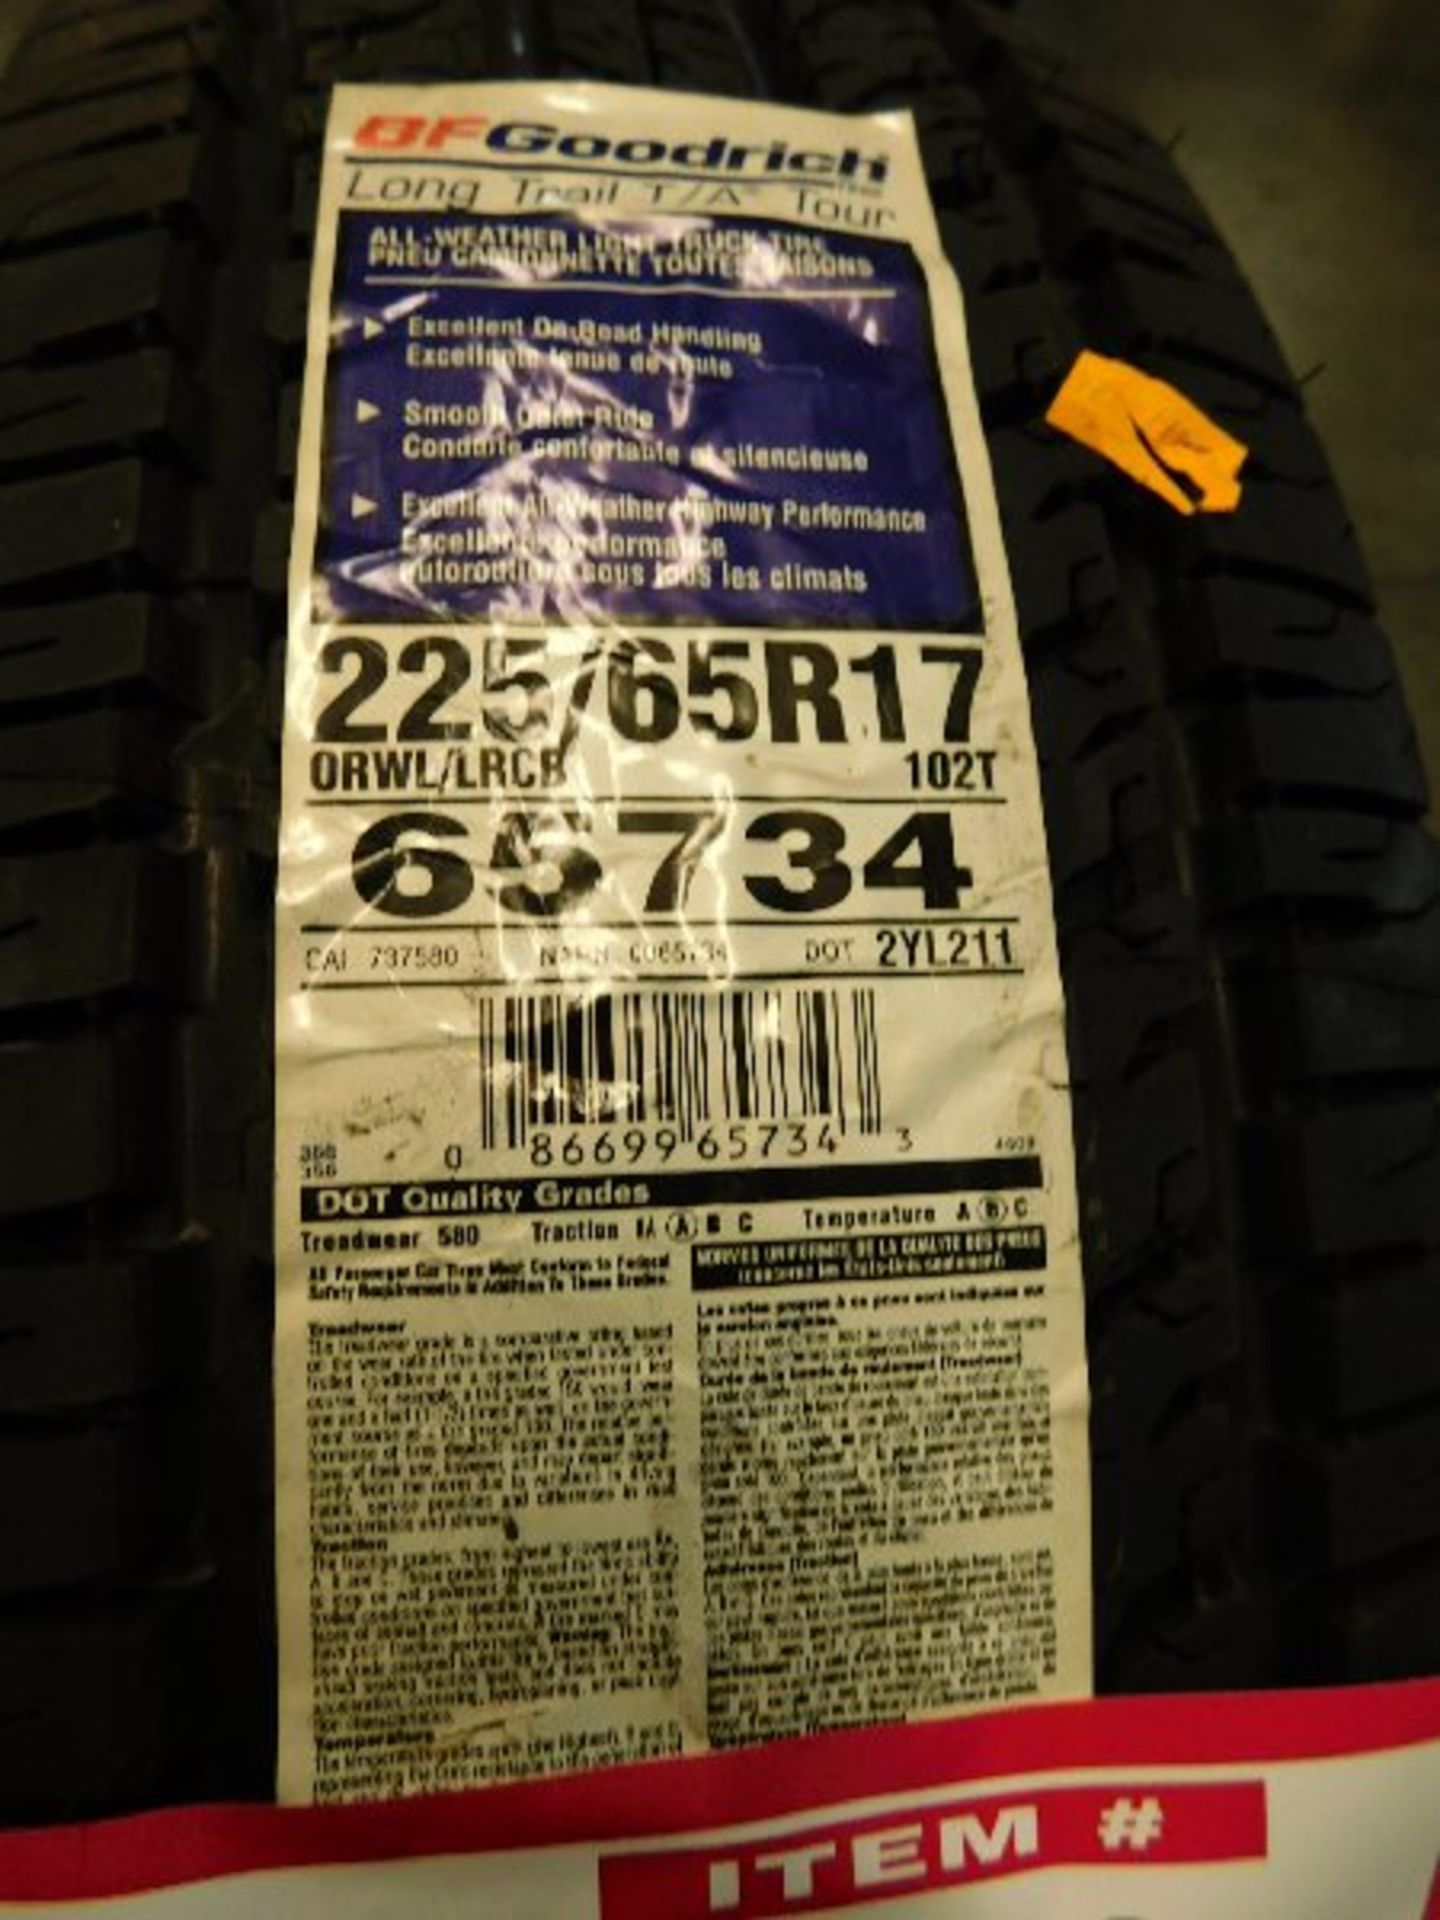 (4) BF Goodrich Long Trail T/A Tours, Tires, P225/65R17 (TAXABLE) - Image 2 of 2